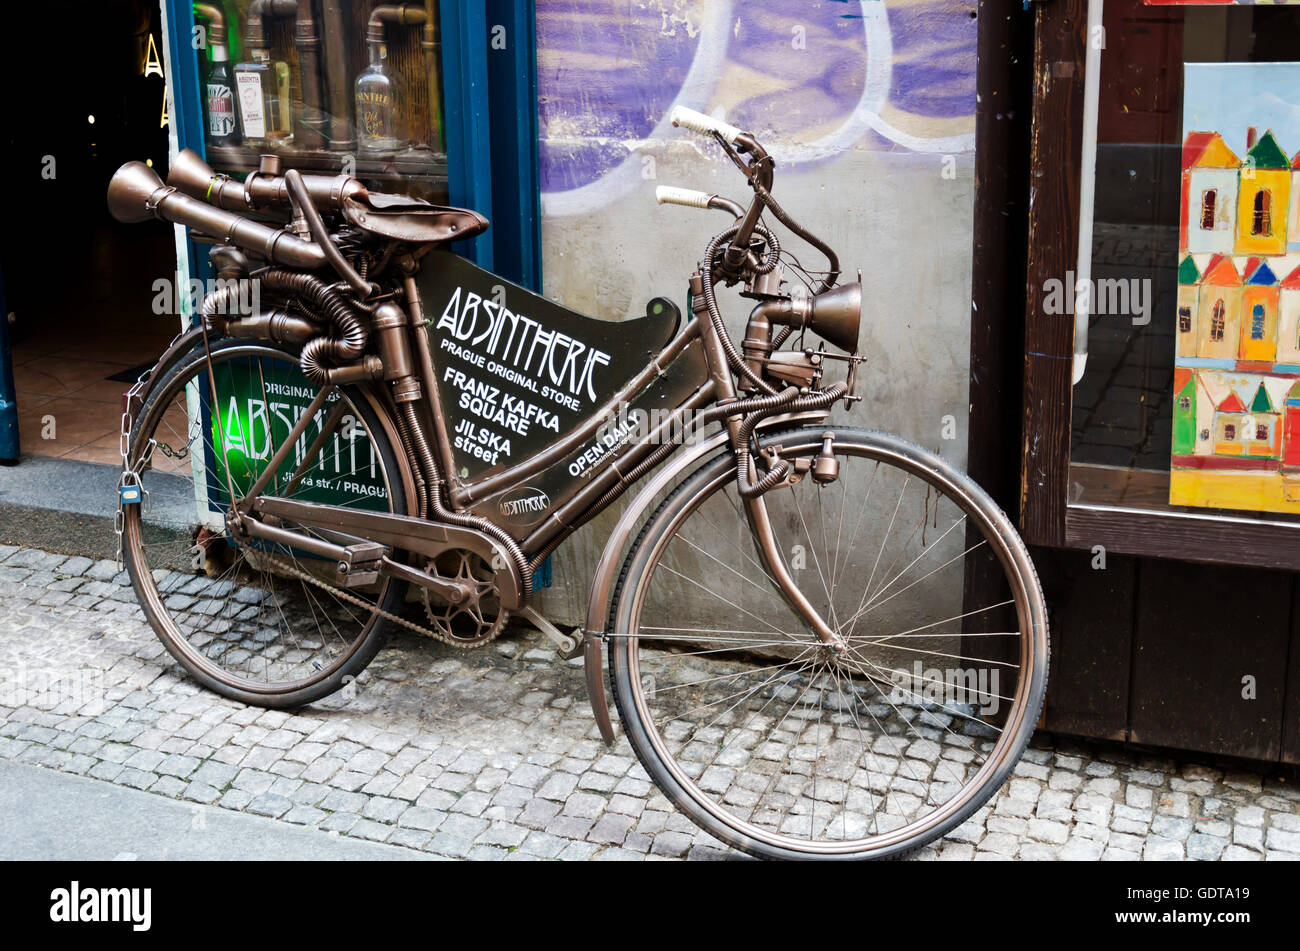 'Jet-powered bicycle' outside a drinks shop in Jilska Street in the centre of Prague (Praha) in the Czech Republic Stock Photo